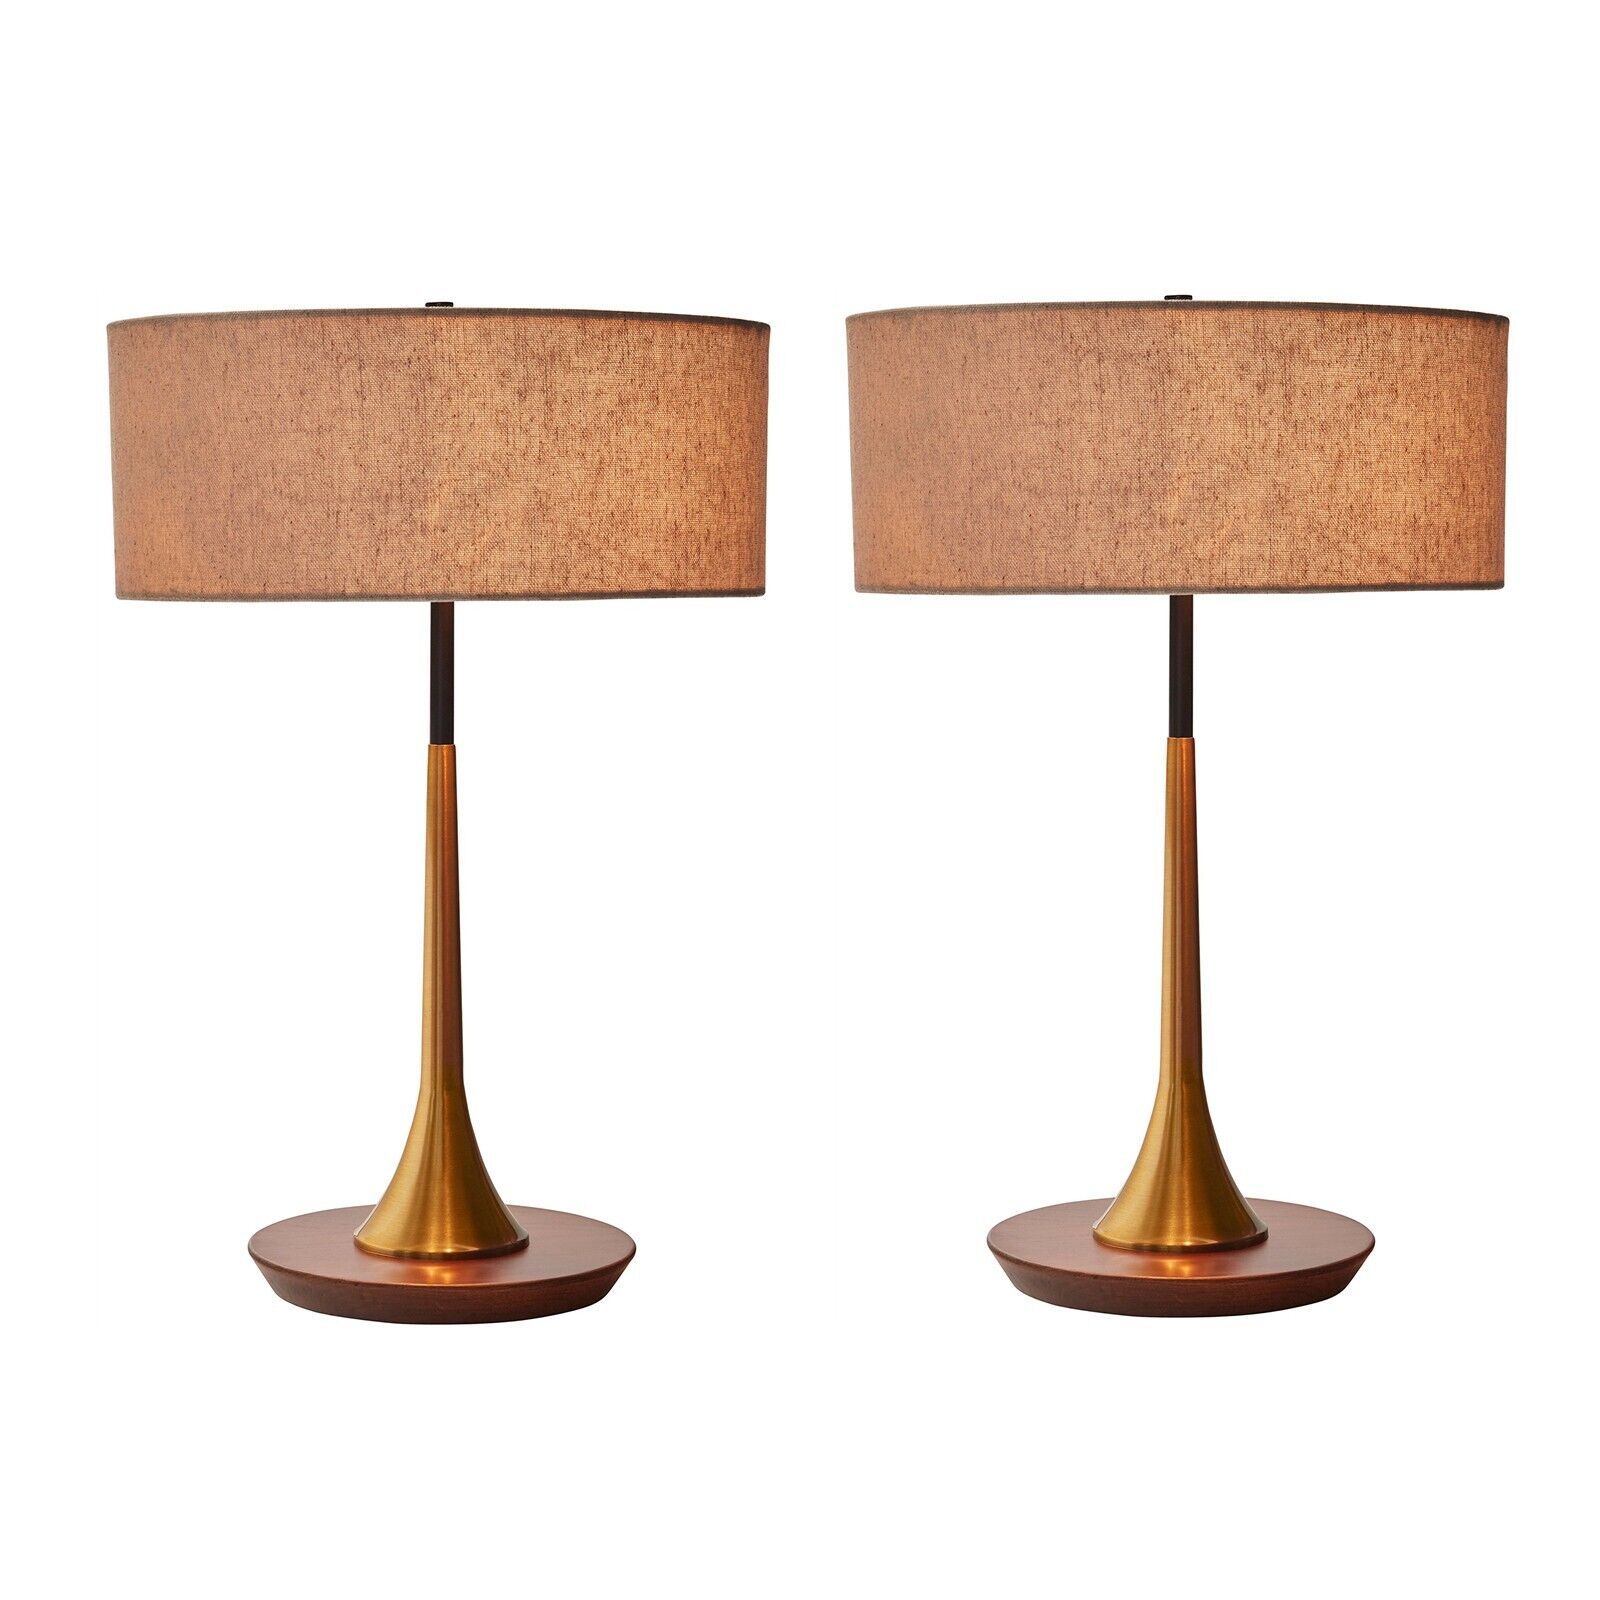 Set of 2 Mid Century Modern Table Lamp Desk Lamps Fabric Shade with LED Bulb